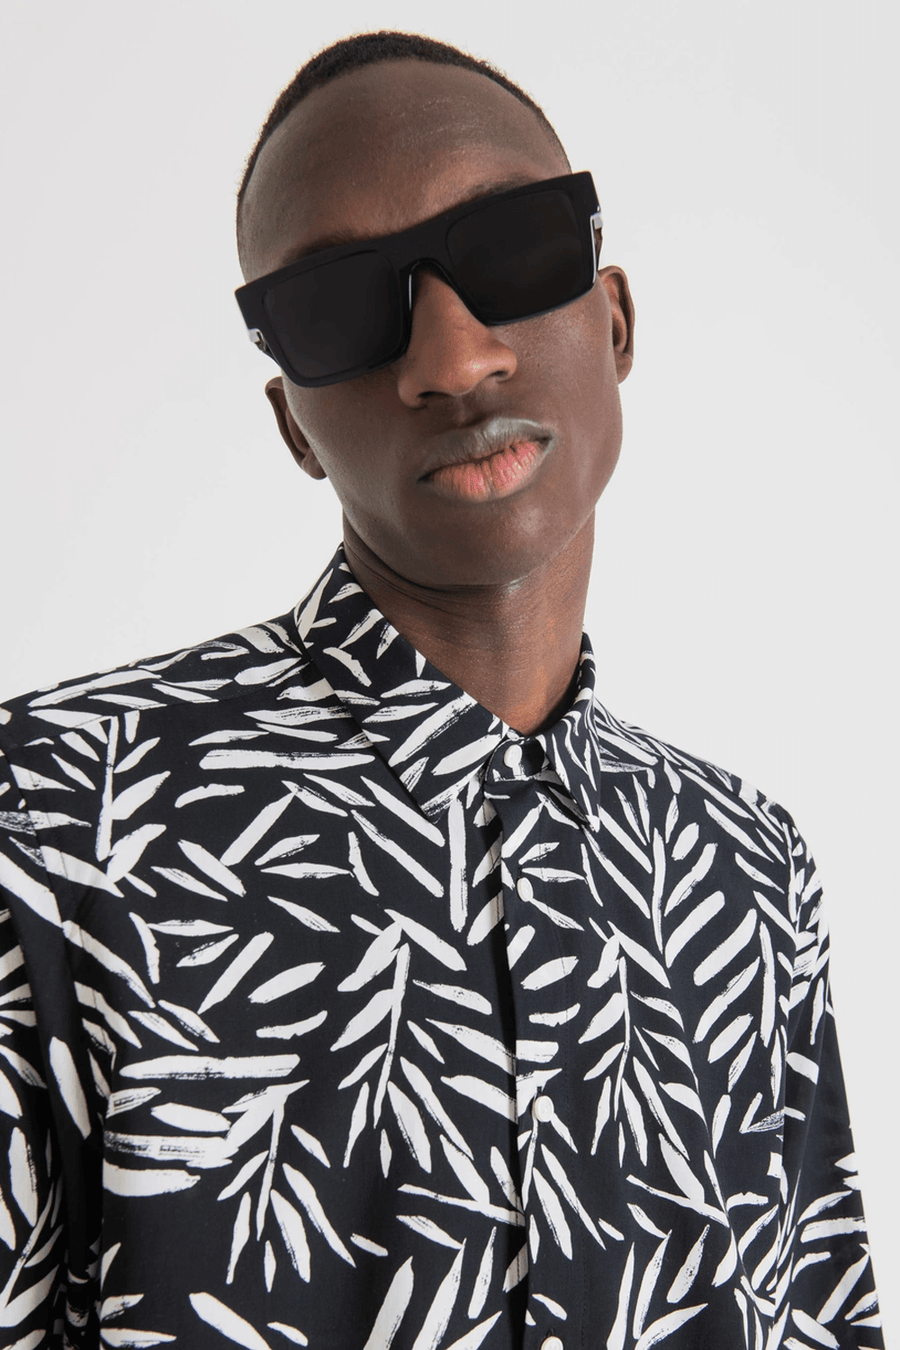 Buy the Antony Morato Barcelona Print Shirt in Black at Intro. Spend £50 for free UK delivery. Official stockists. We ship worldwide.